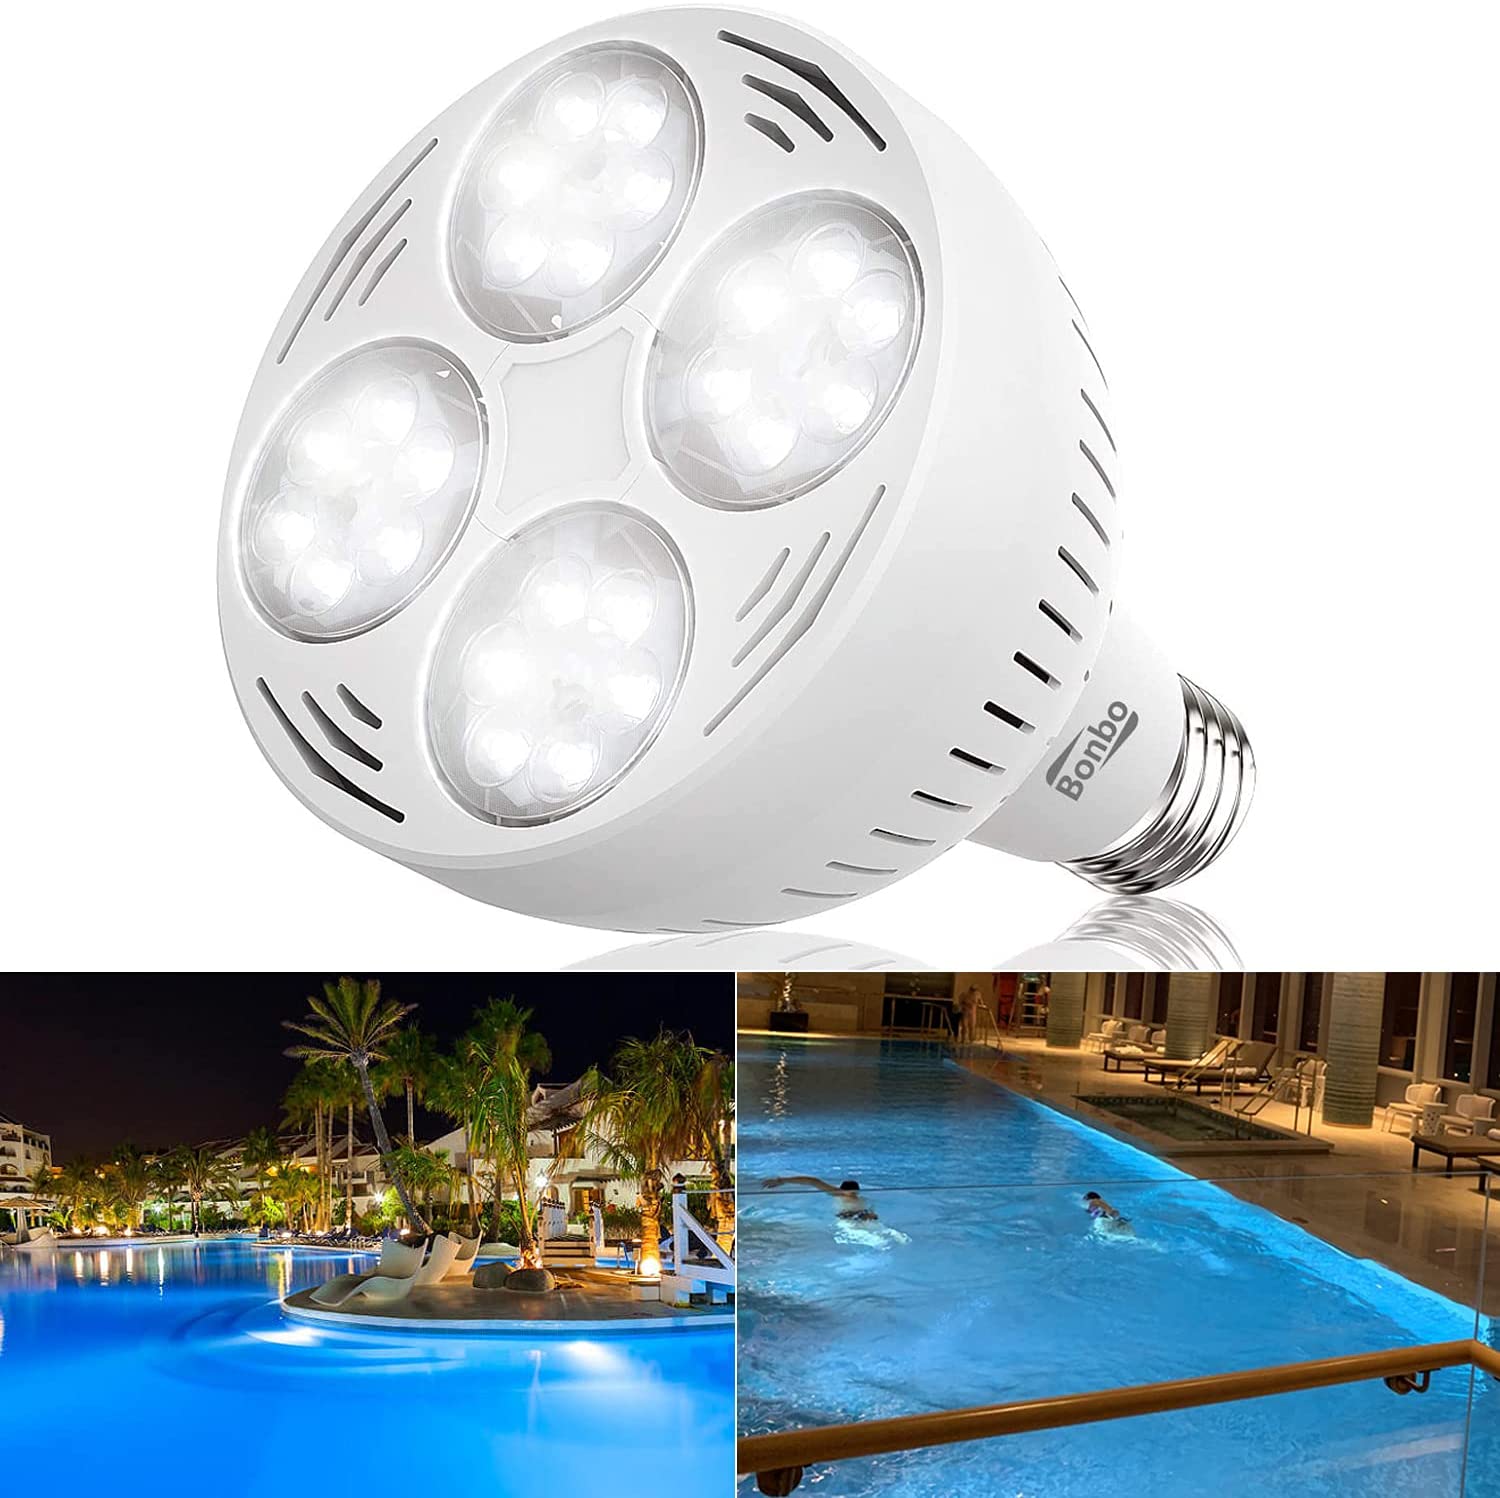 Swimming Pool Lamp USB Rechargeable Underwater Pool Lights for Inground or Above Ground Swimming Pools Spa Fountain Pond Hot Tub Greatideal Pool Lights 